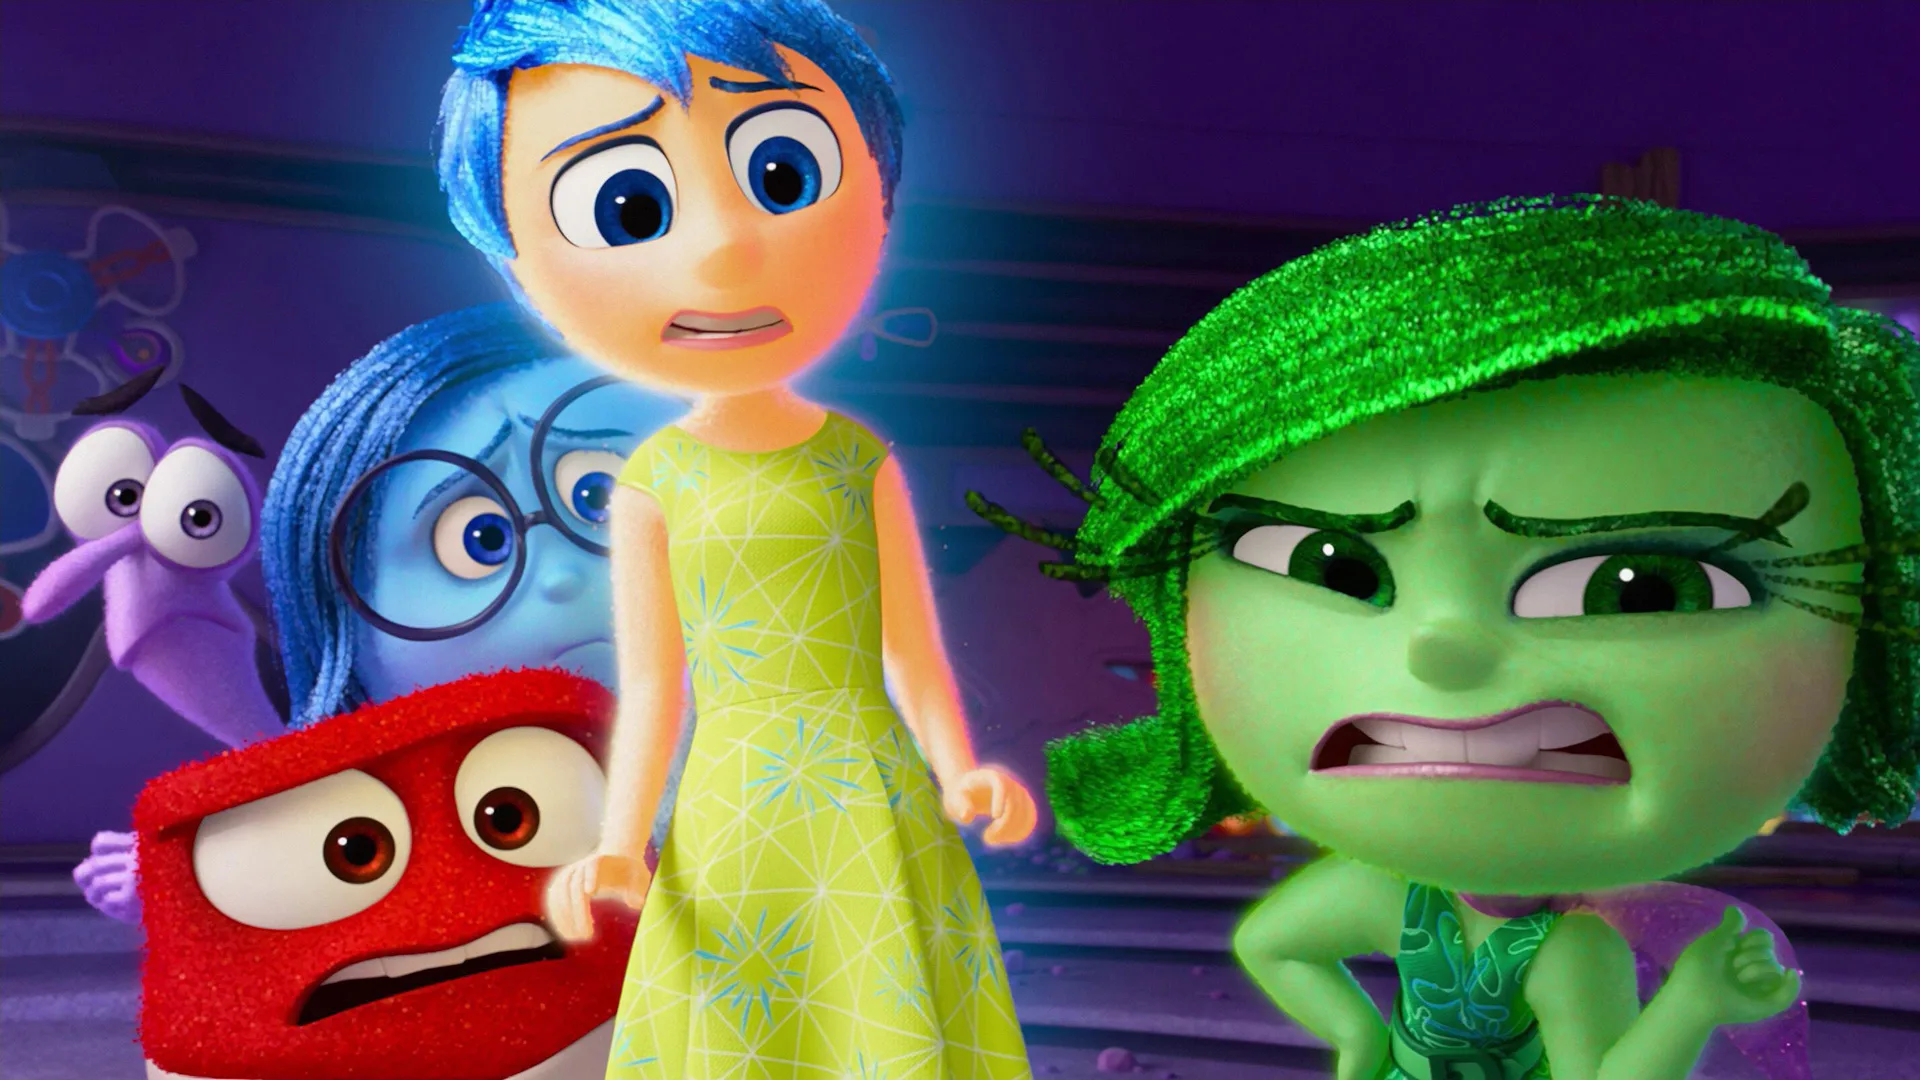 A scene from Disney Pixar film Inside Out showing Disgust grimacing as Joy, Anger and Sadness stand behind her looking worried.